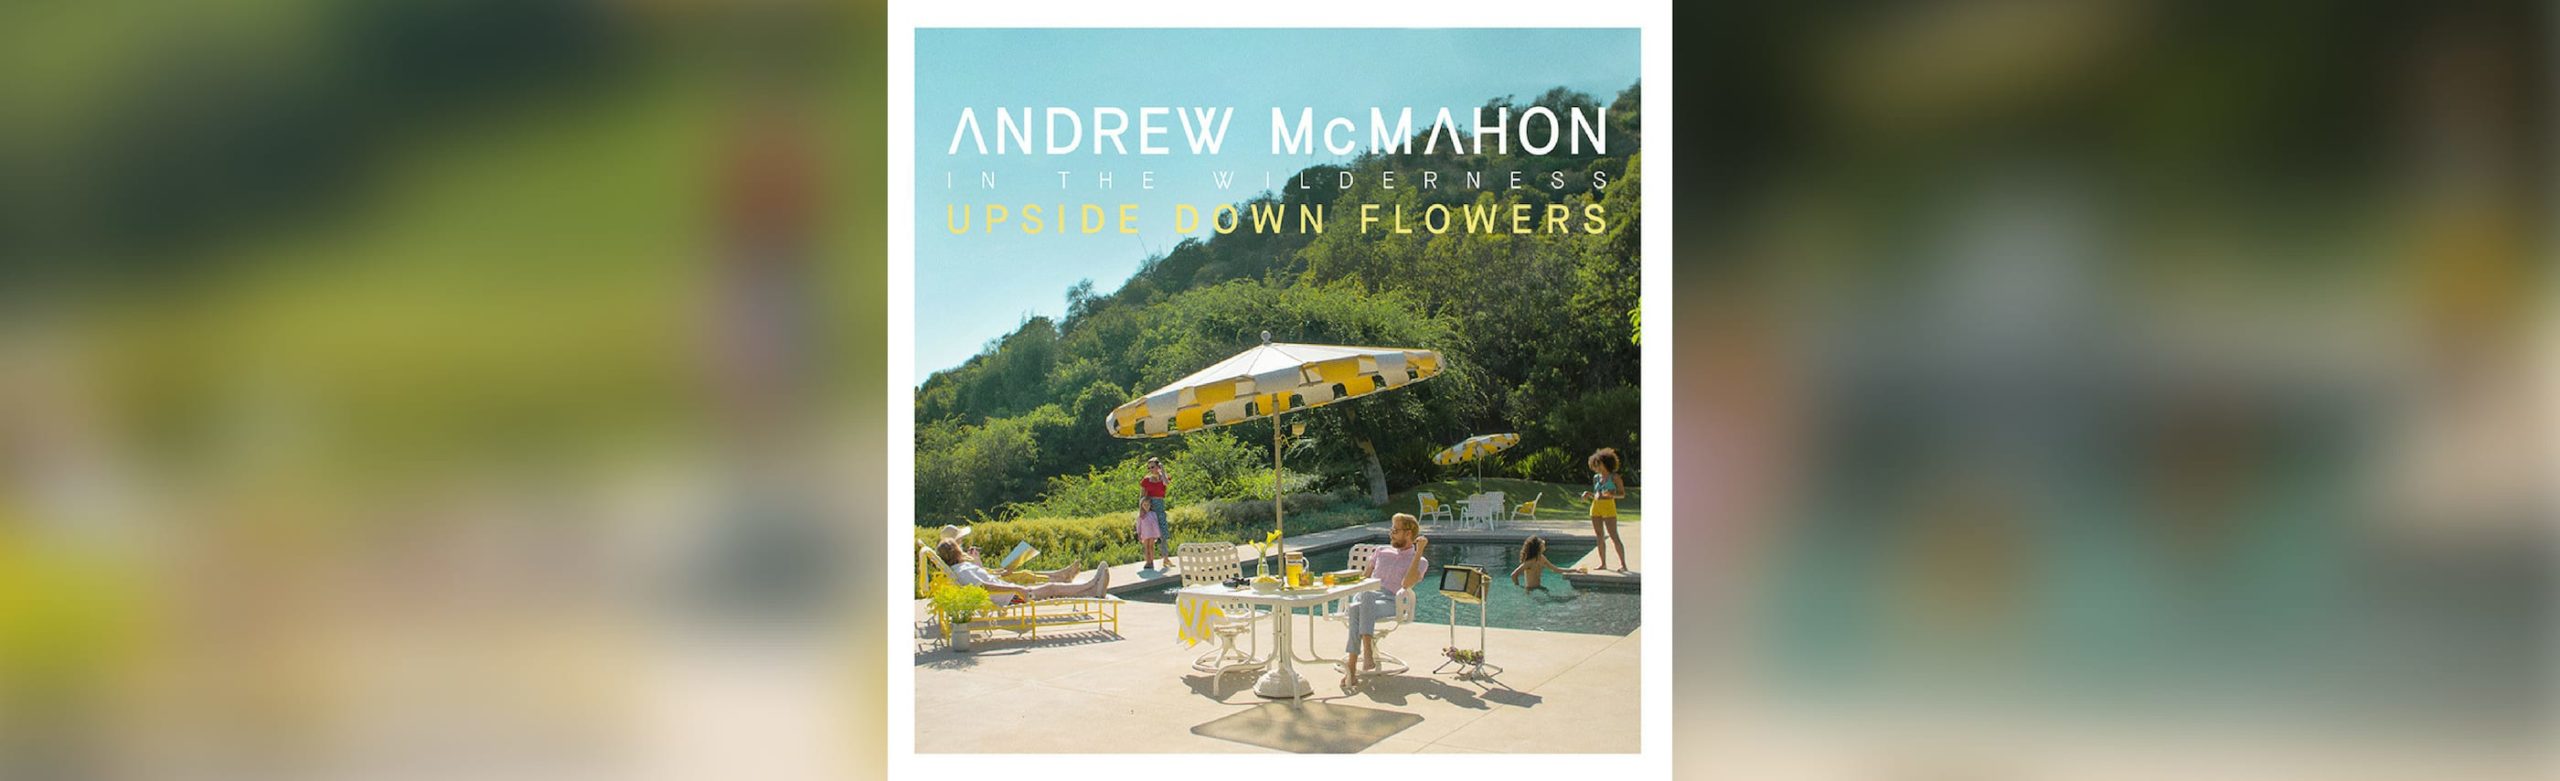 Andrew McMahon in the Wilderness Unveils “Upside Down Flowers” Image